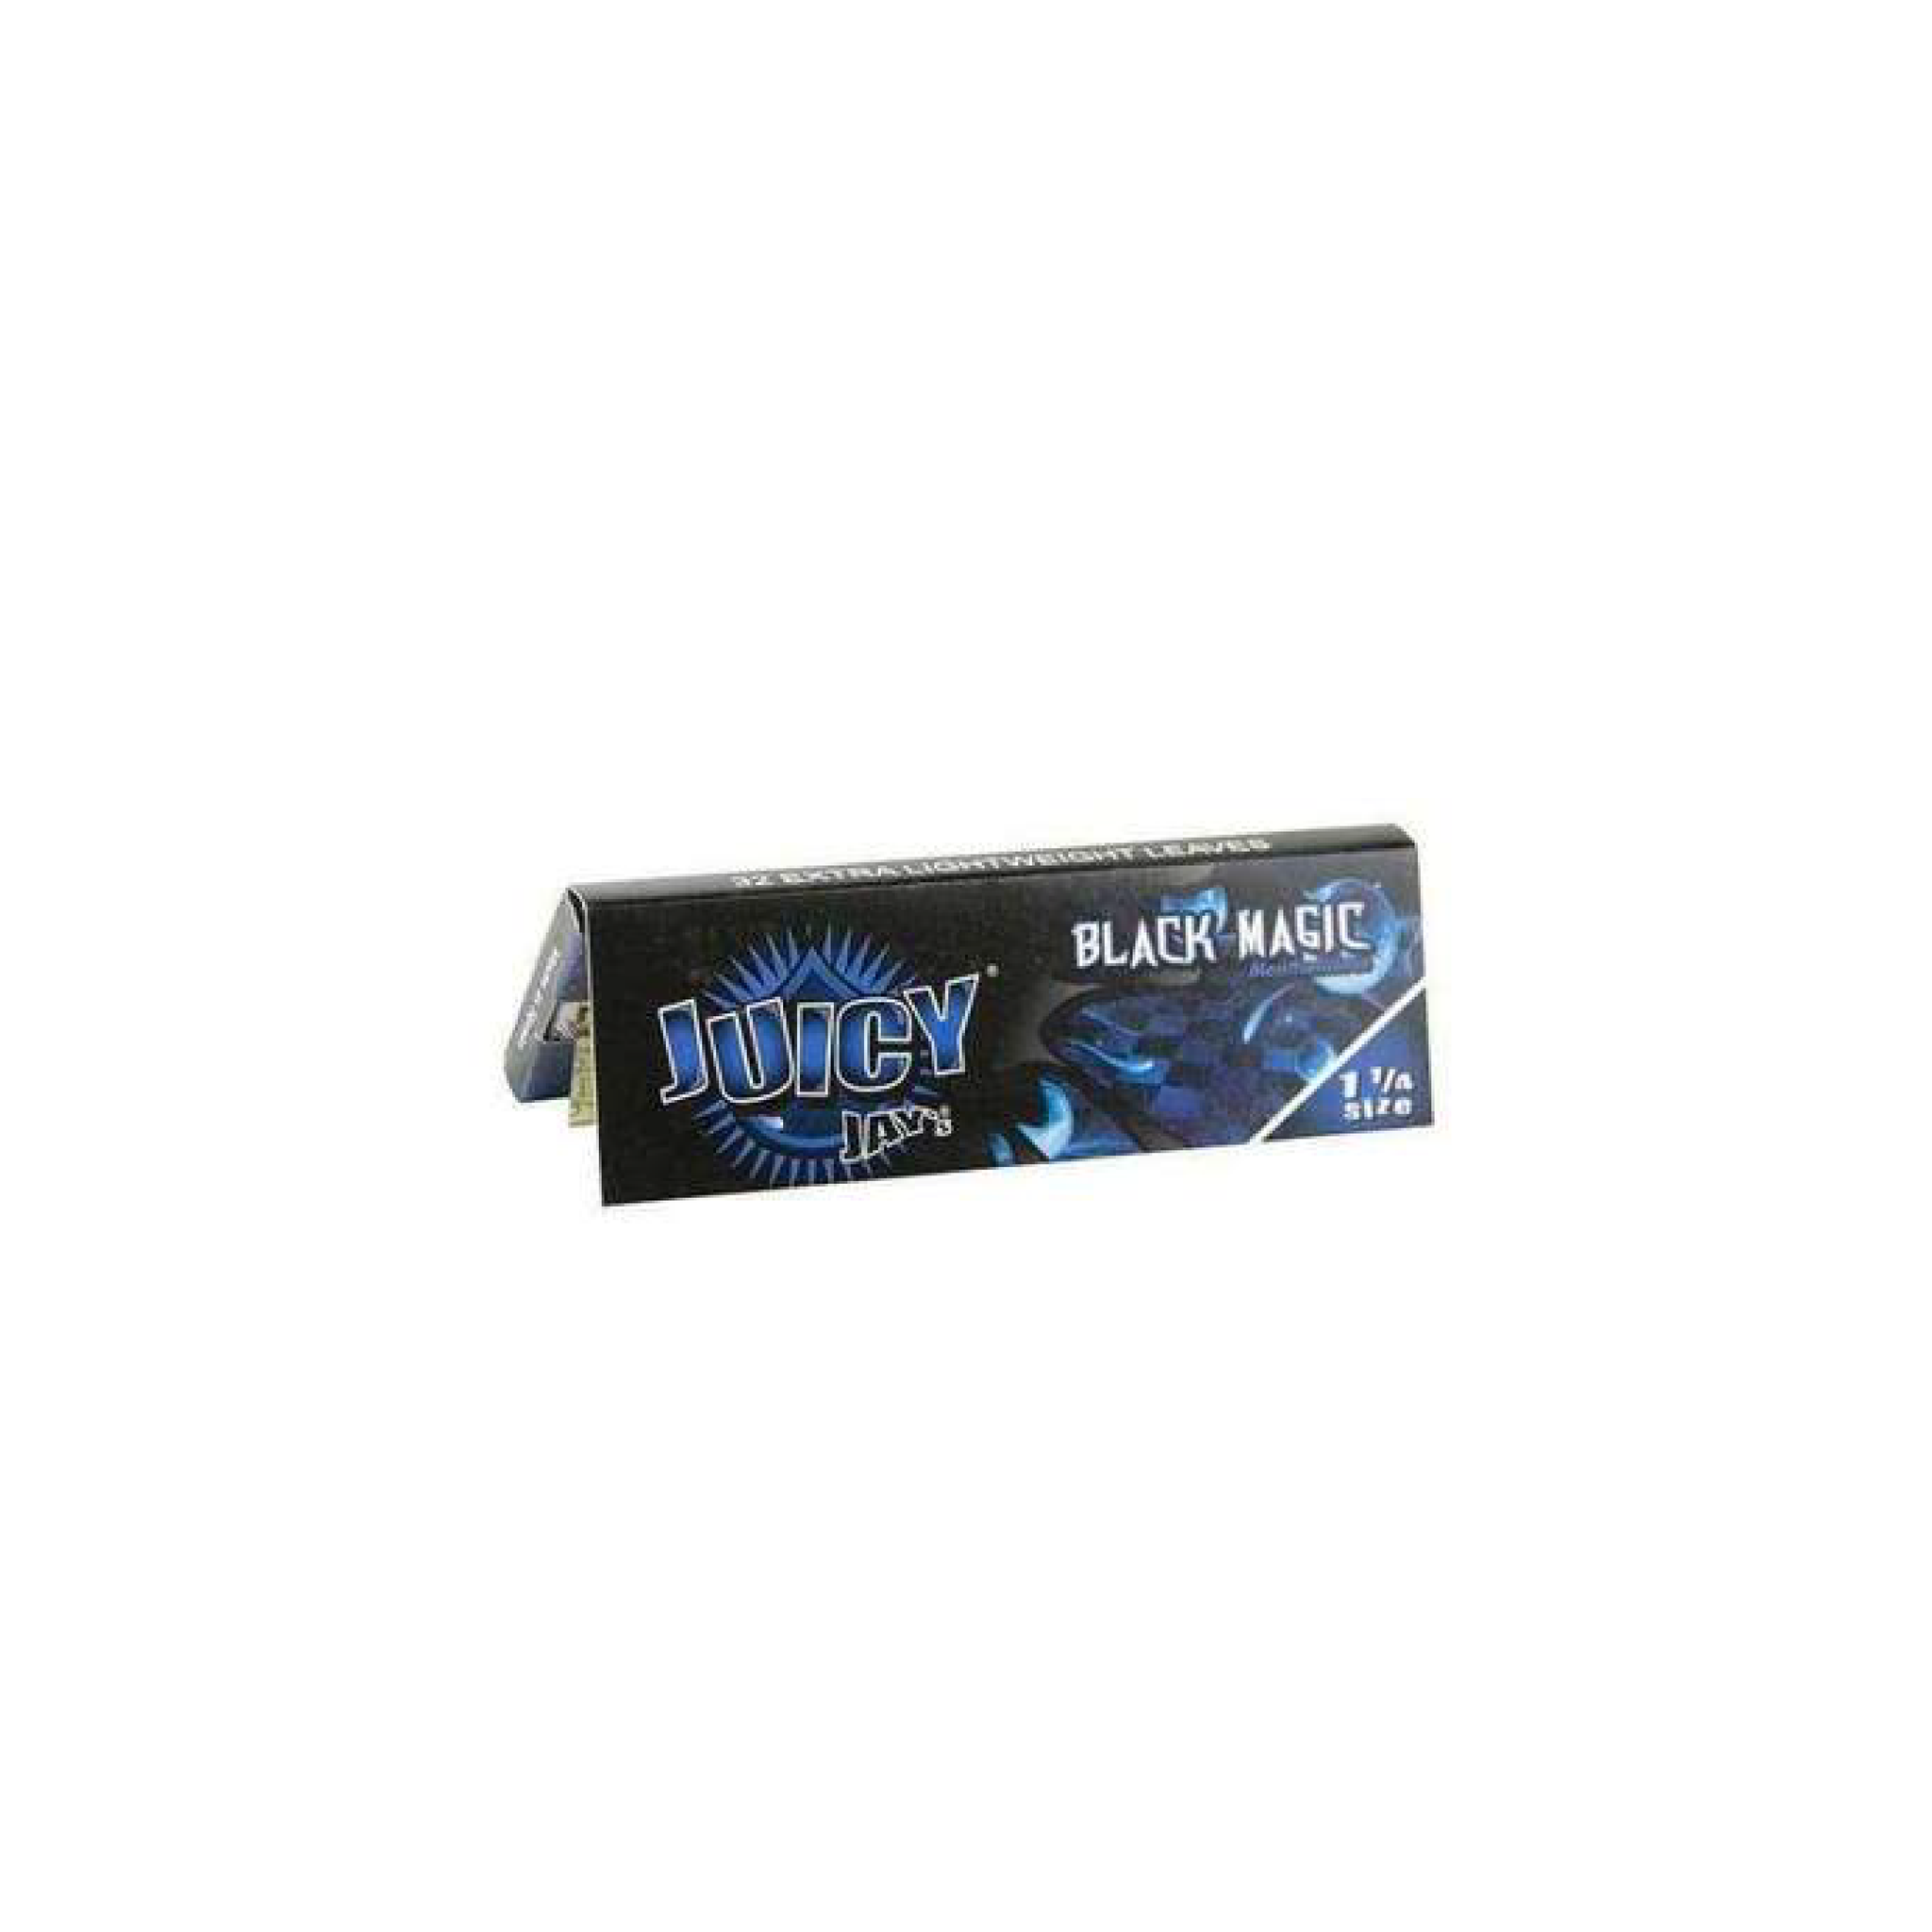 Black Magic Rolling Papers